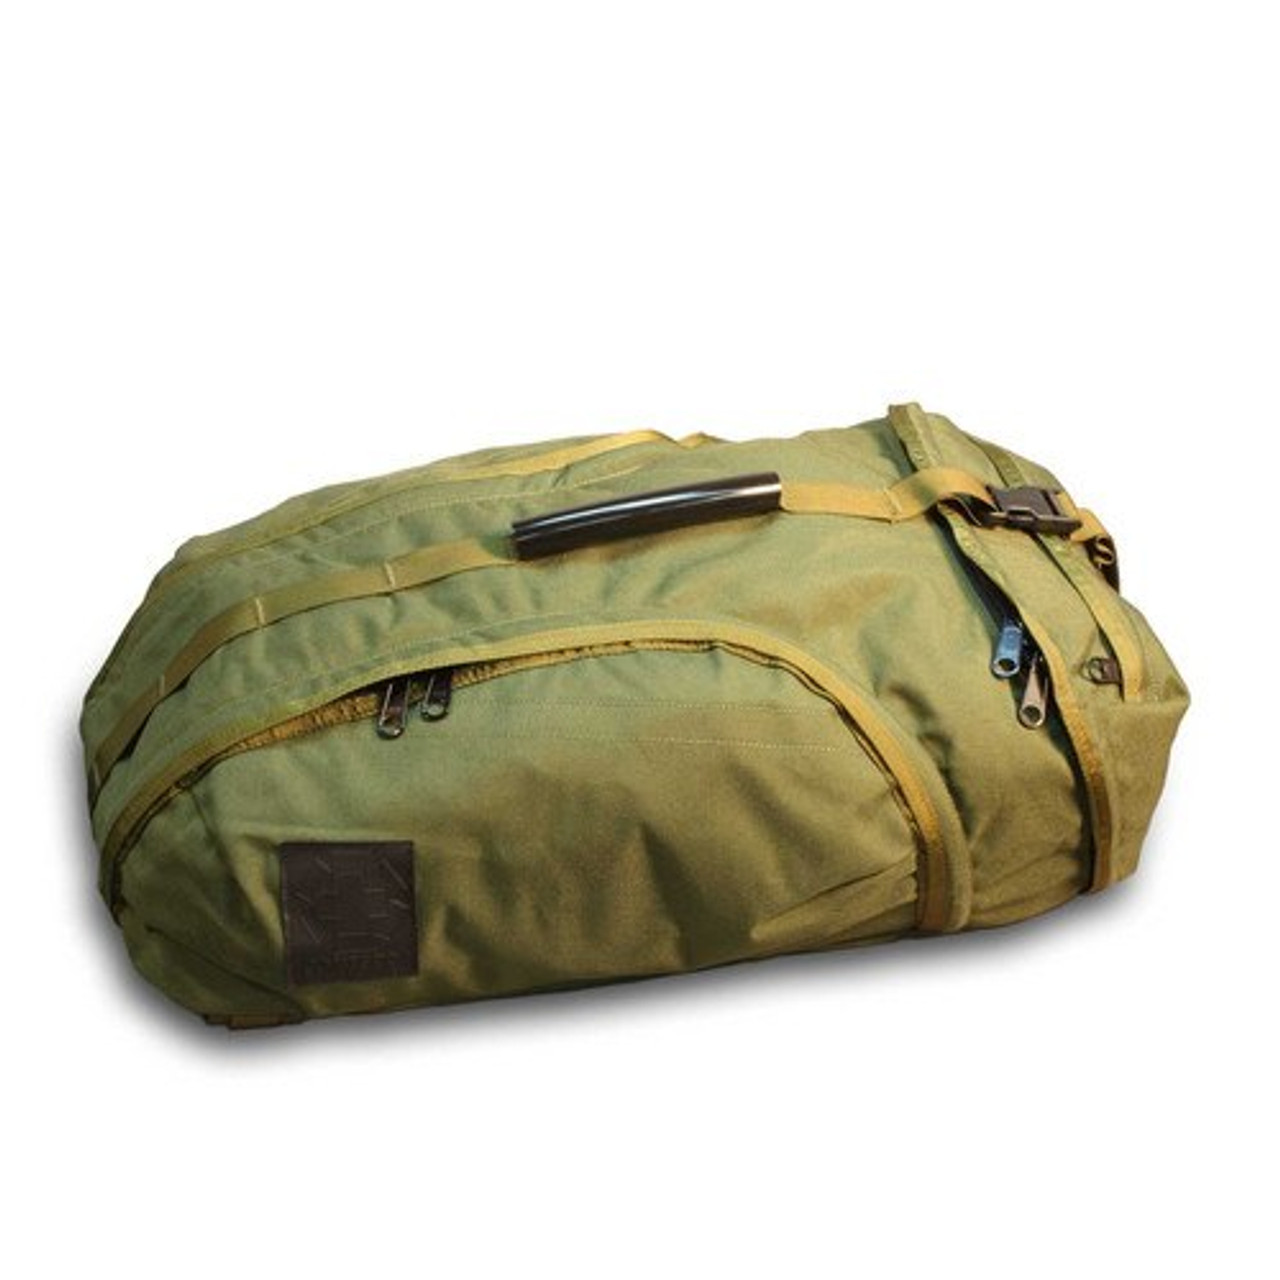 SPECIAL OPS AIRBORNE DUFFLE